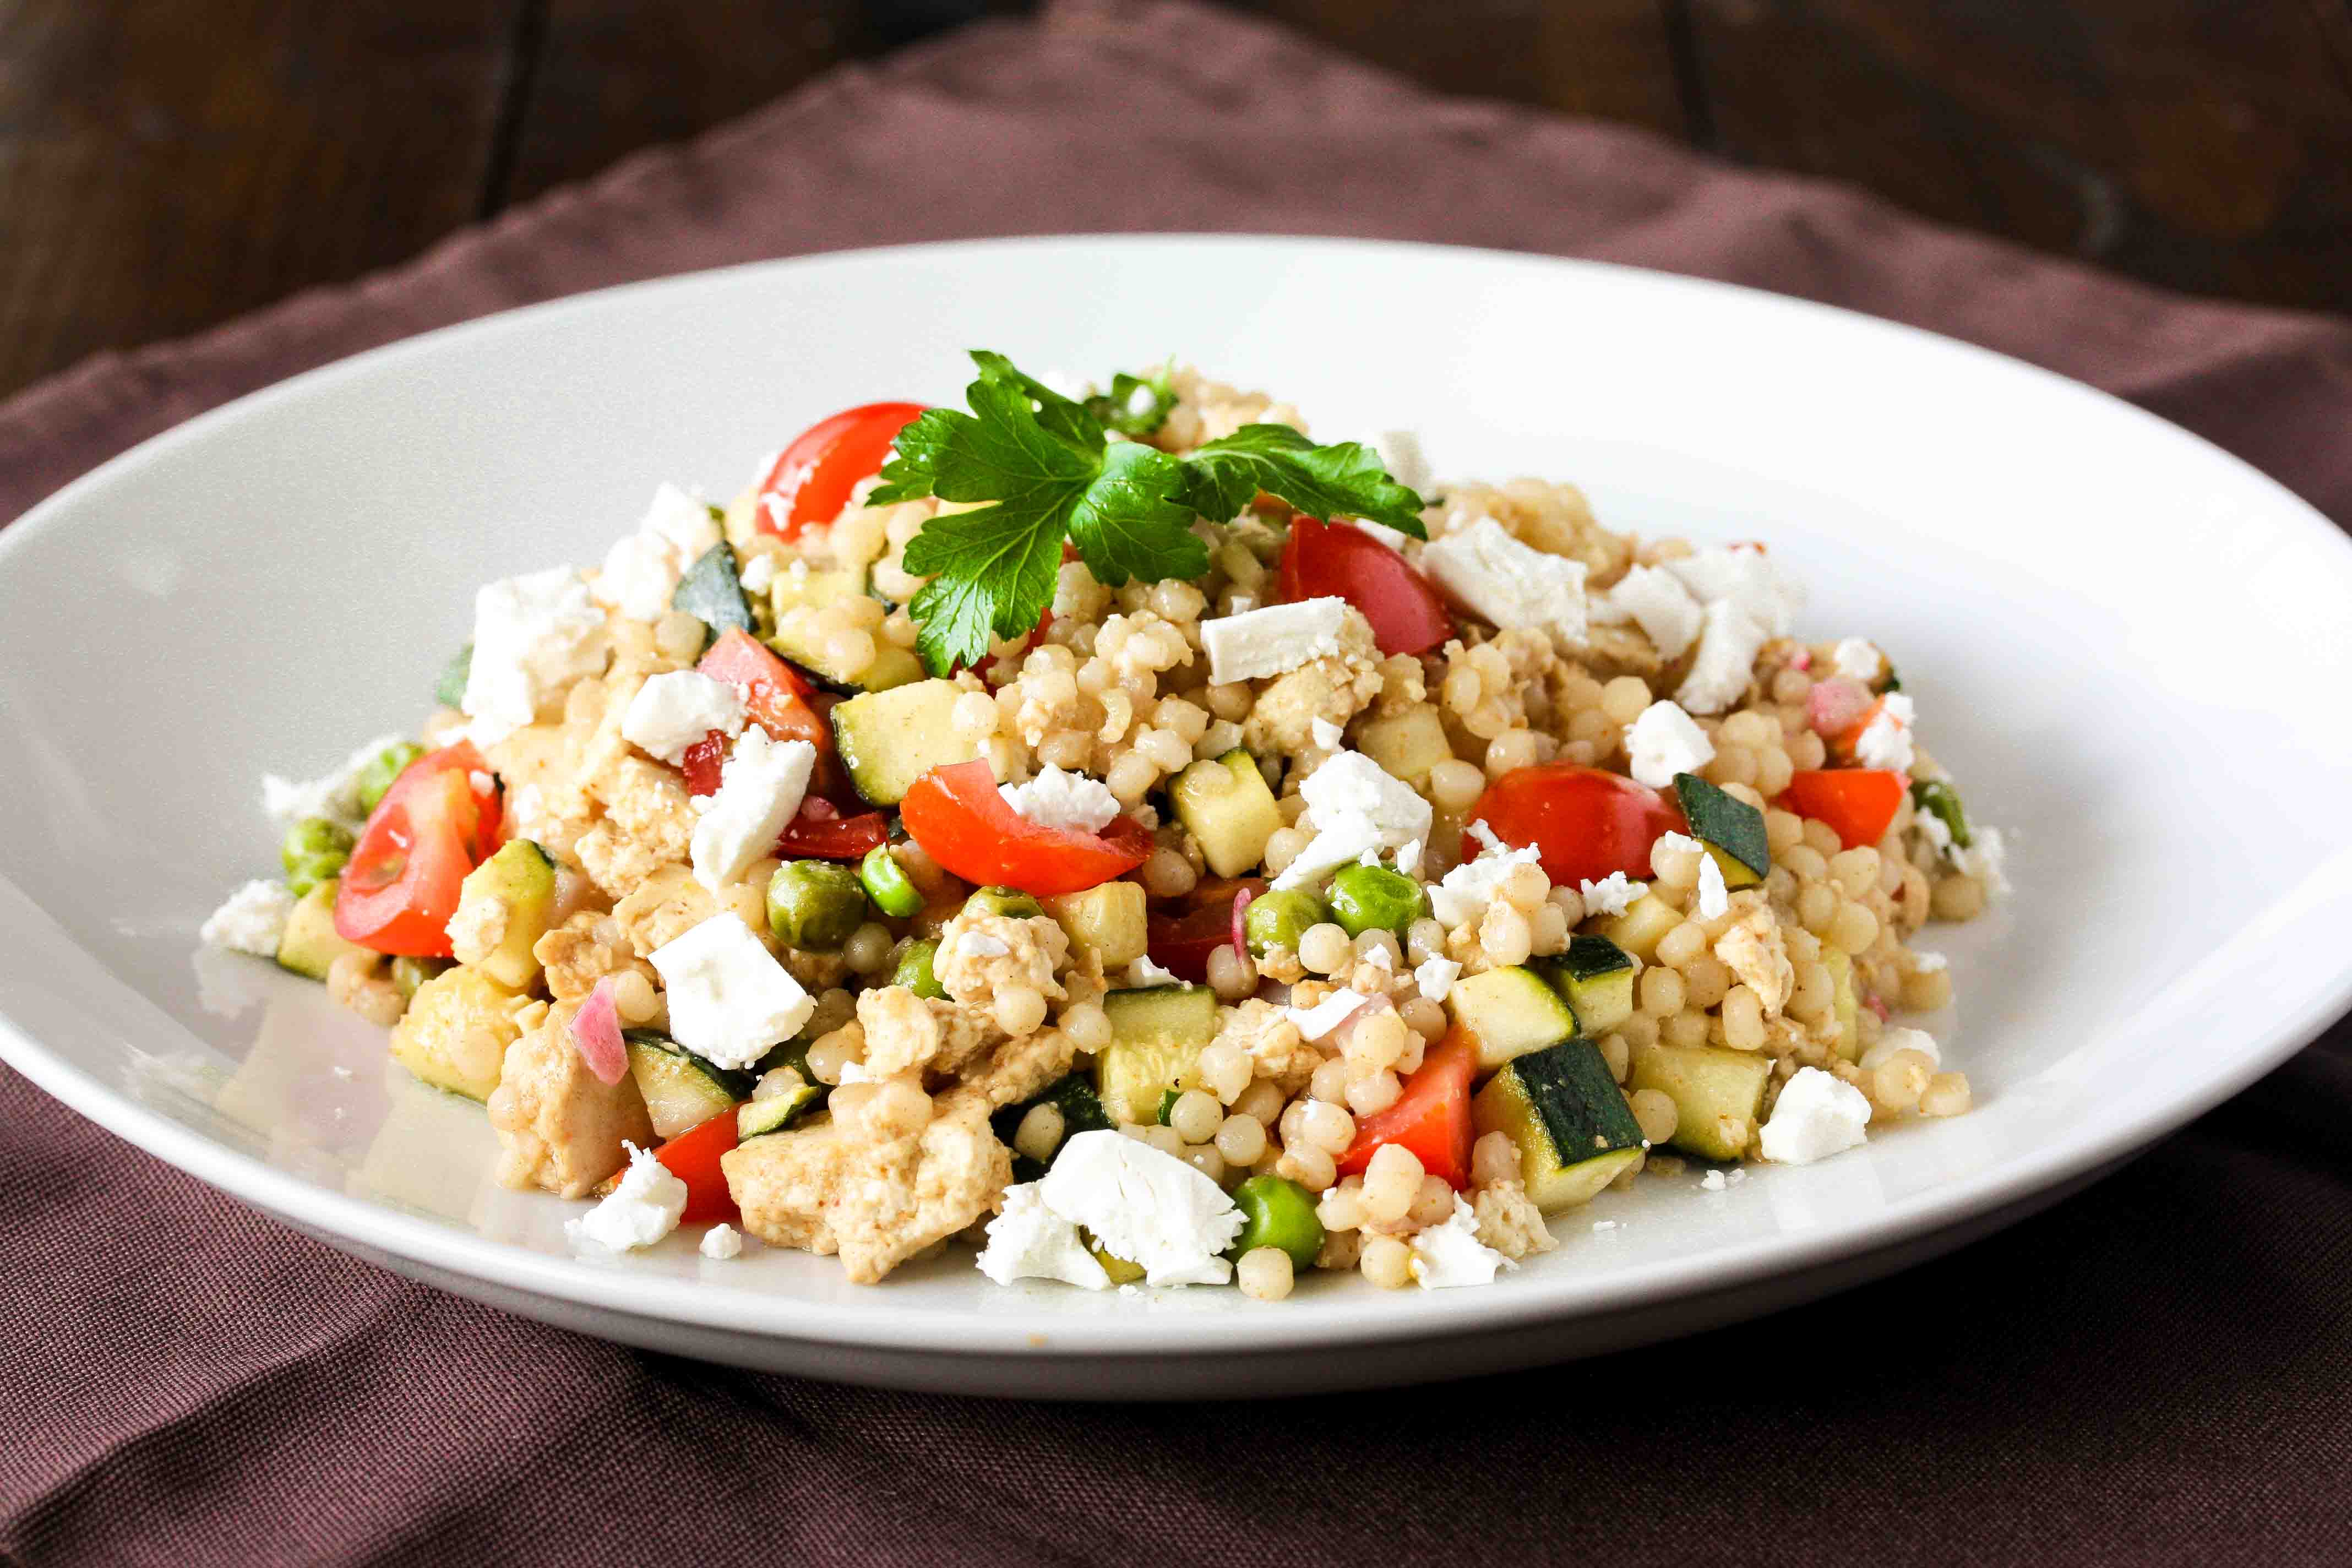 Smoky lemon tofu and pearl cous cous salad with zucchini, tomato and feta